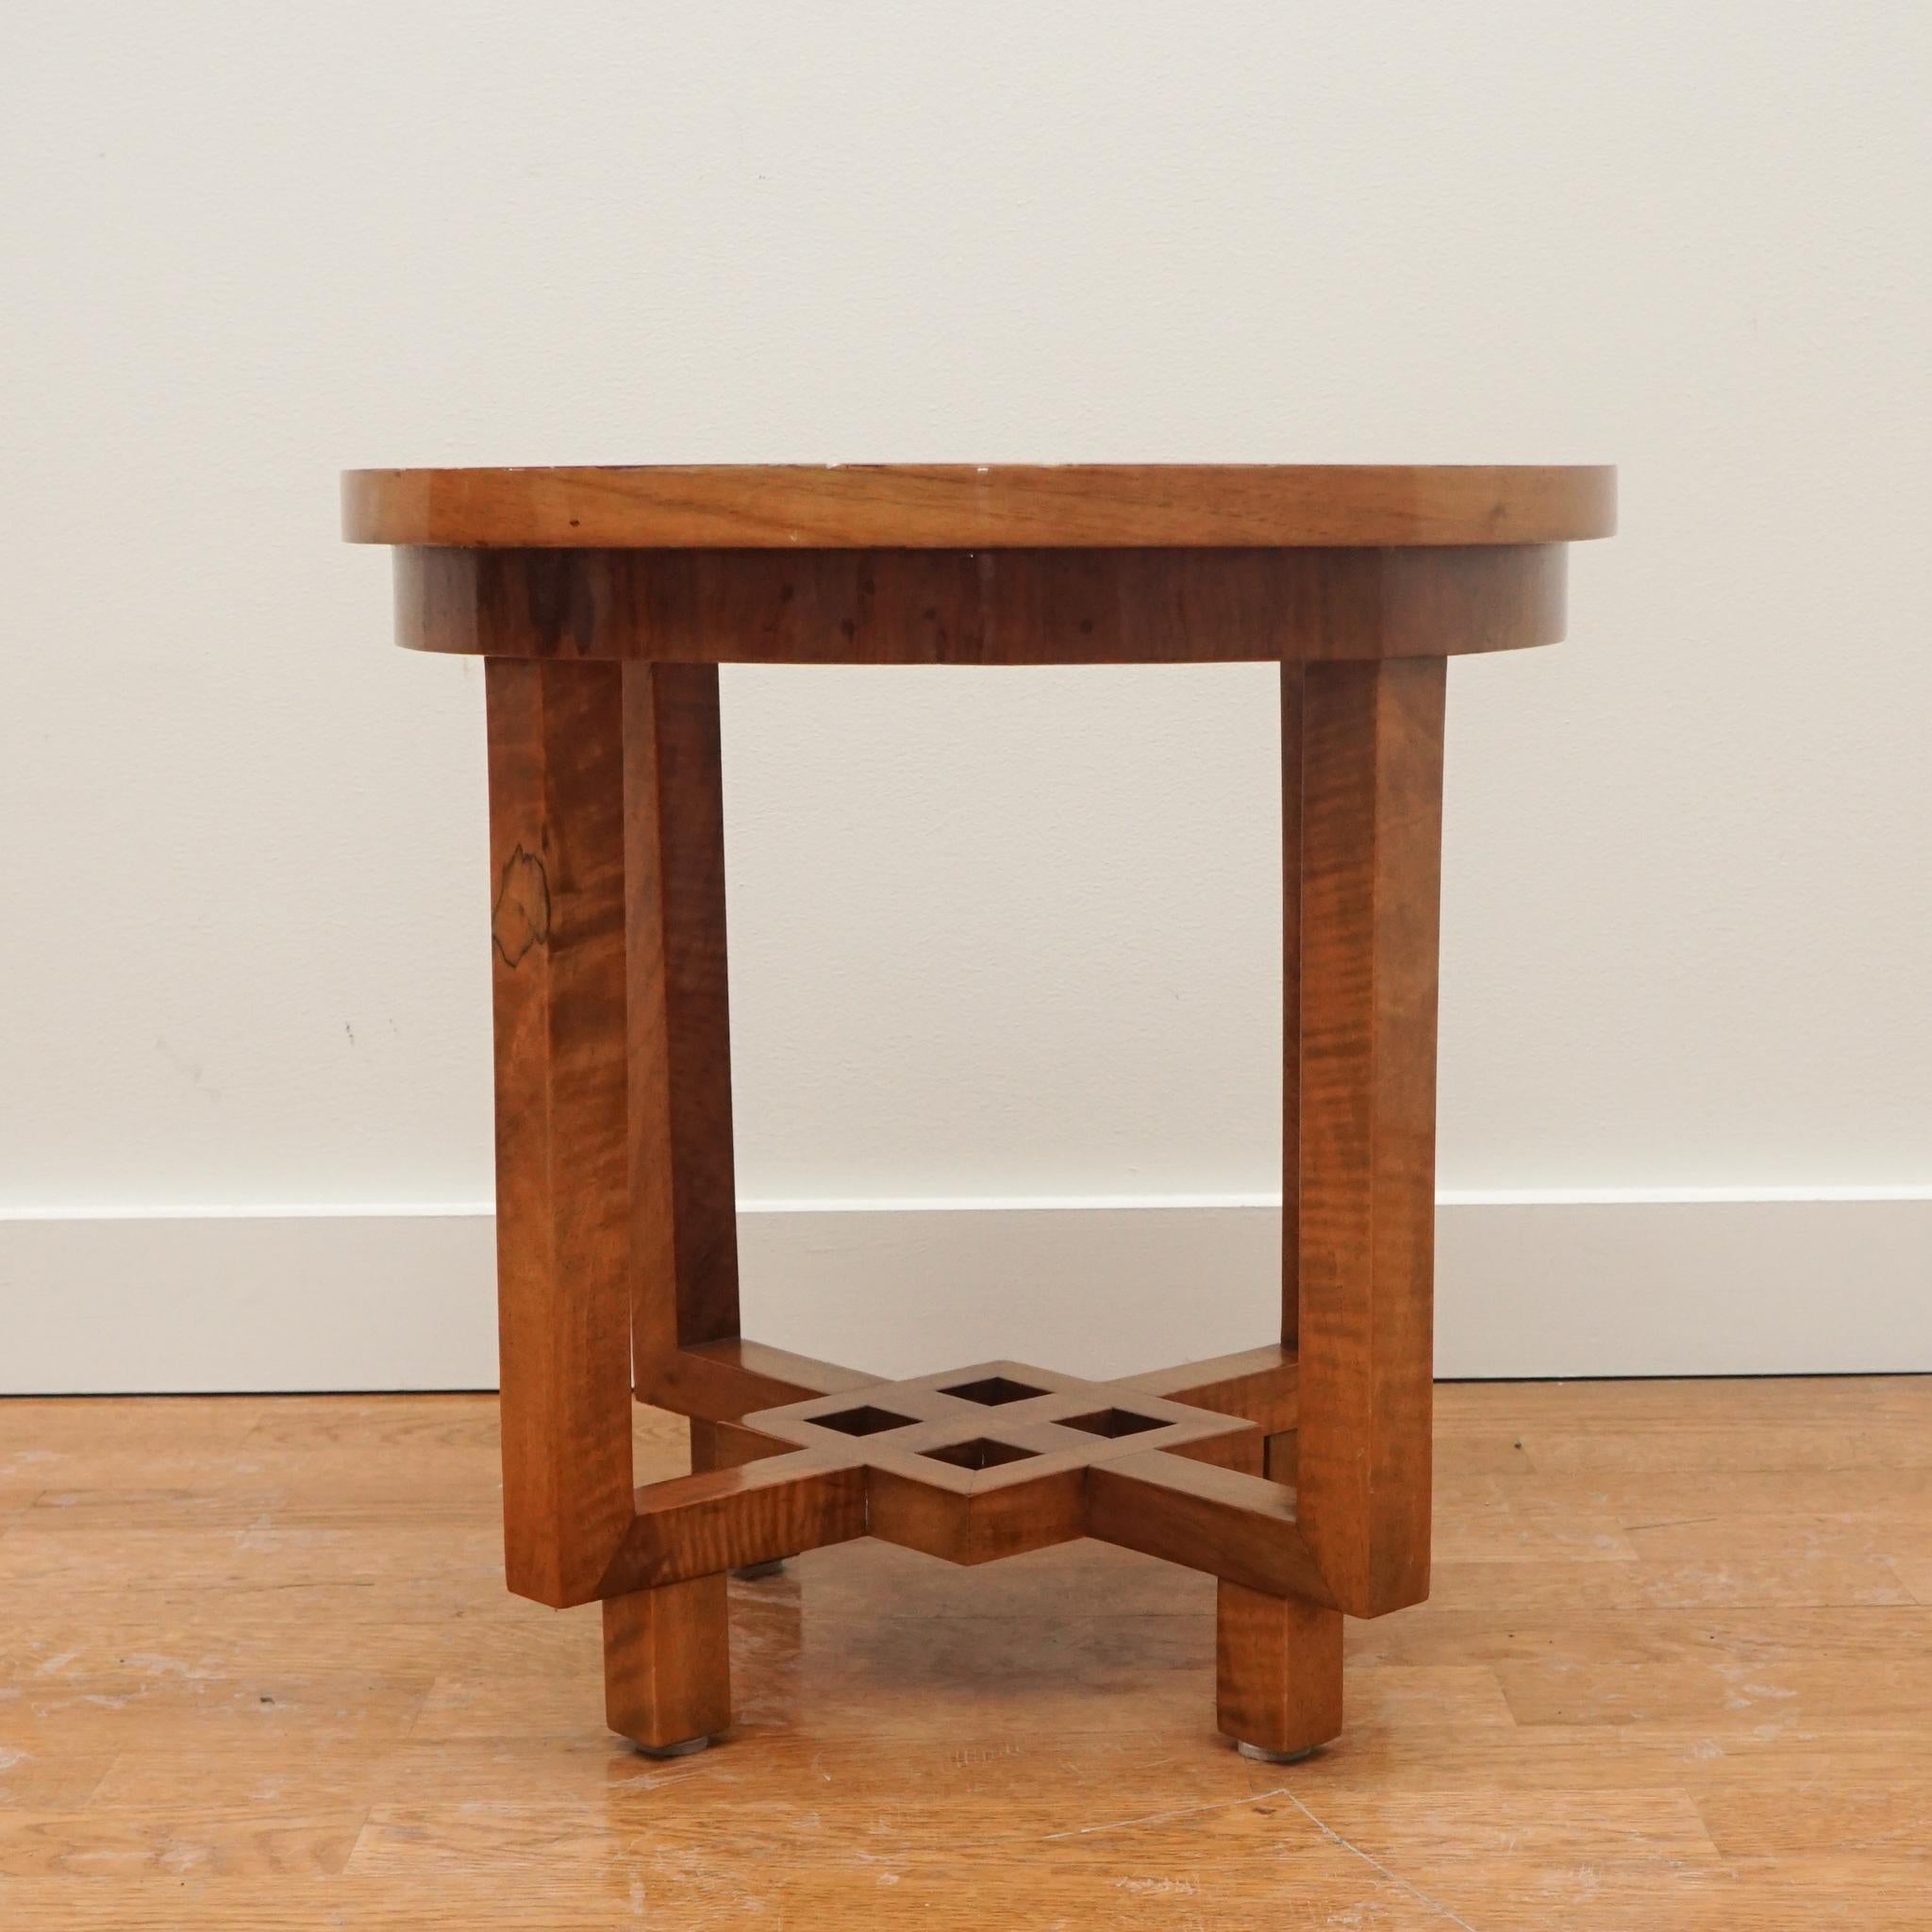 This exquisite Art Deco occasional table is from Karl Kemp Associates. Featuring a book matched burlwood veneer top design, the round table is distinguished by its angular legs and geometric base design element. Beautifully aged and in very good